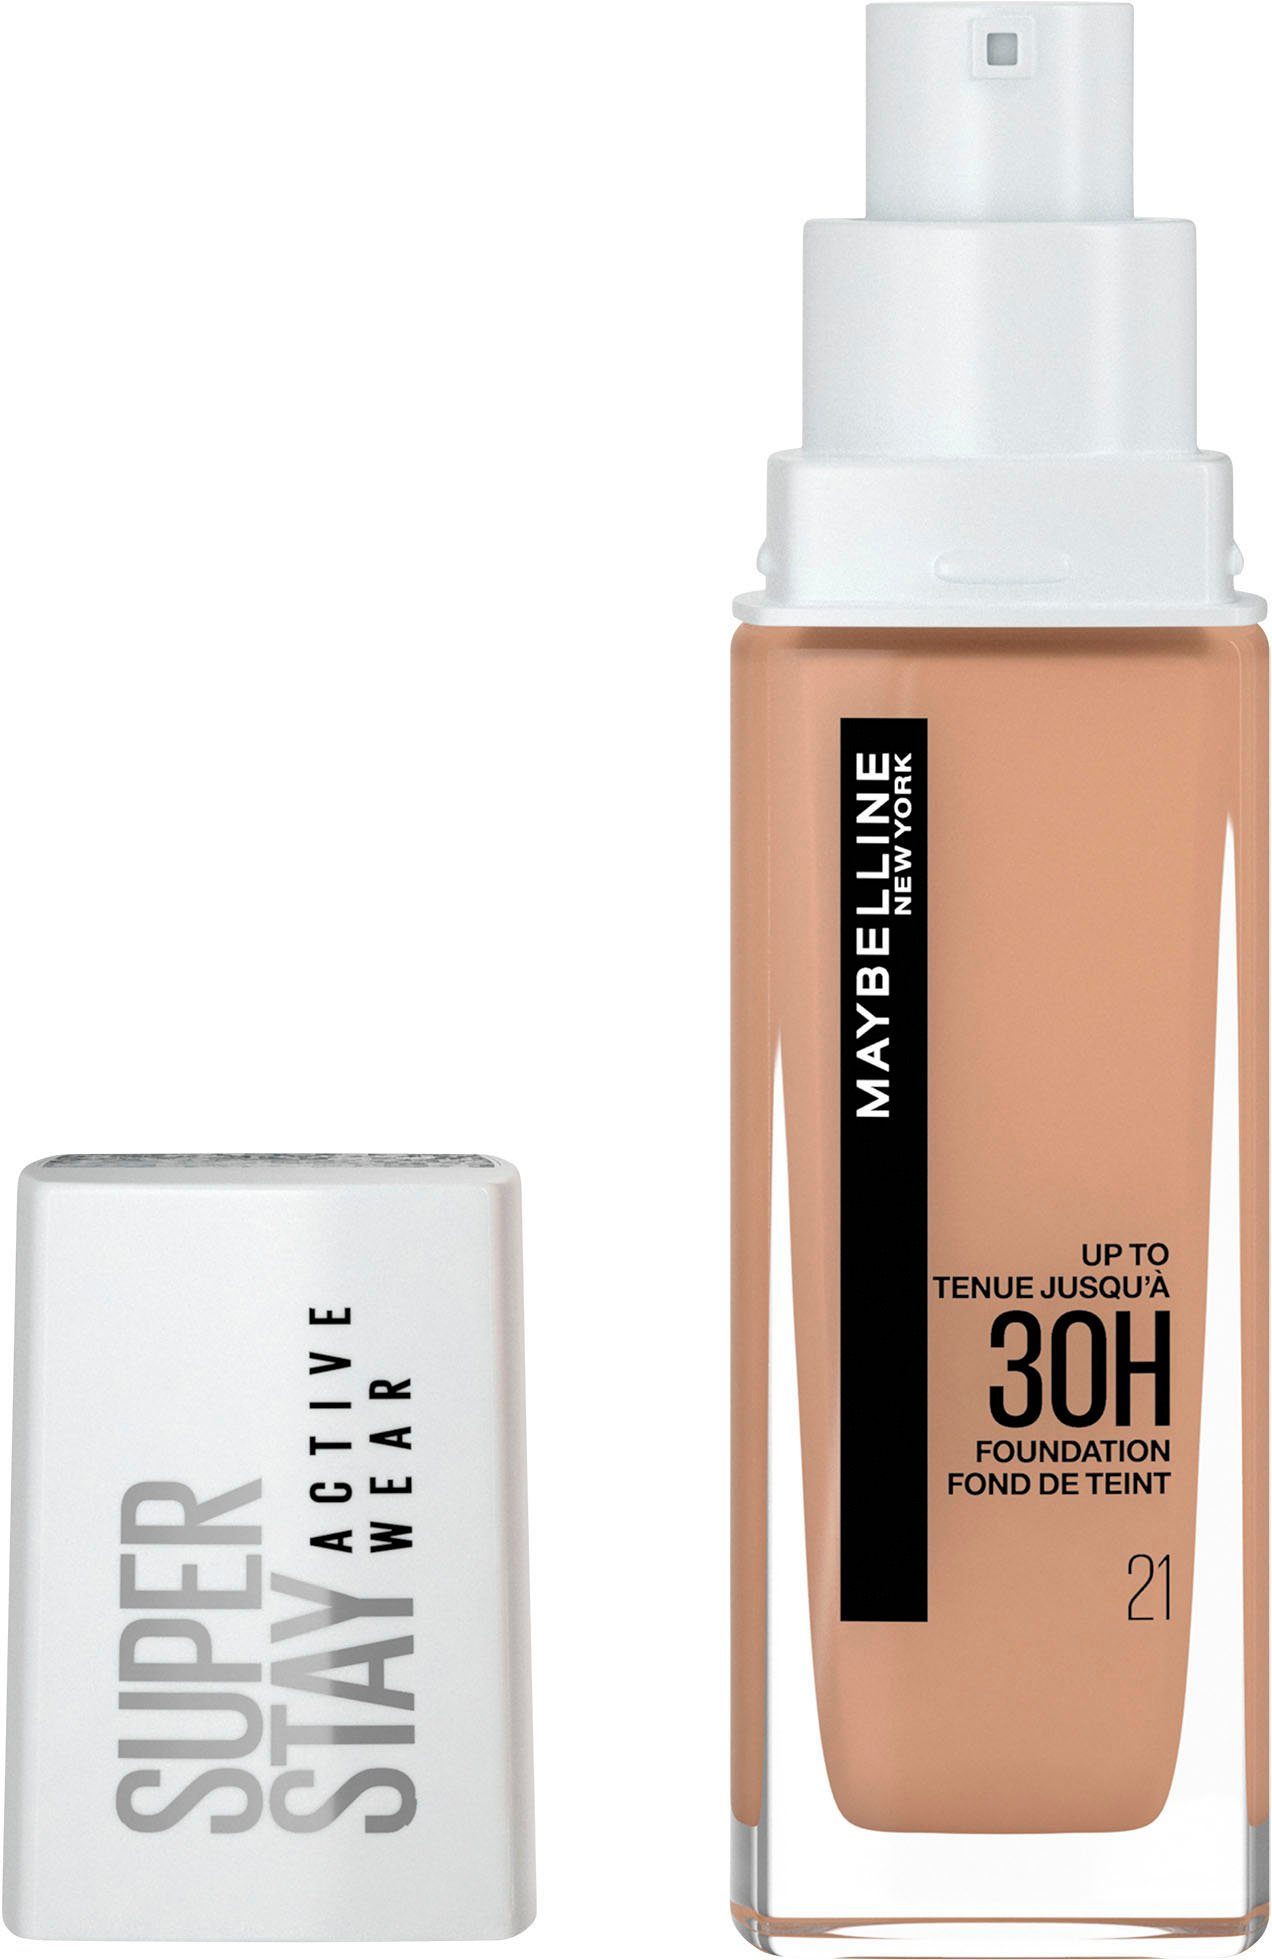 Stay Nude Super Foundation YORK NEW MAYBELLINE Wear 21 Beige Active